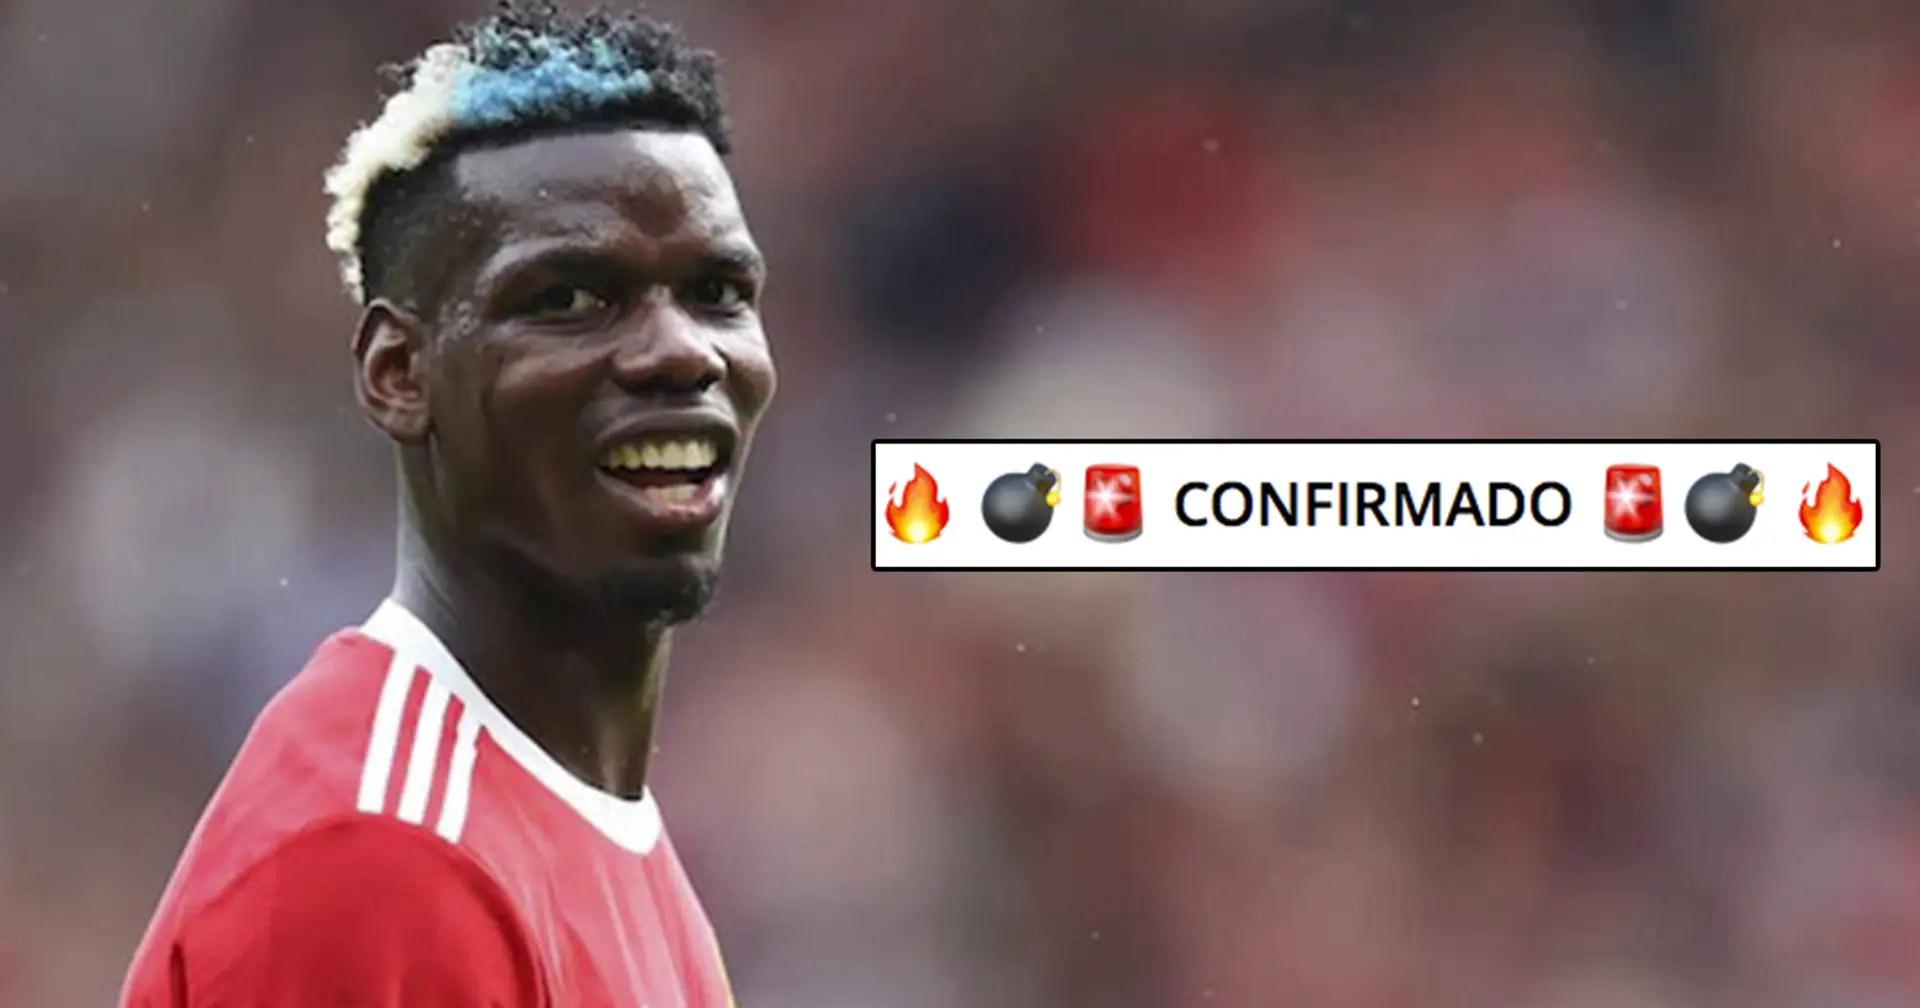 Real Madrid plan to agree on Pogba's free transfer in 2022, player wants to join Madrid (reliability: 4 stars)